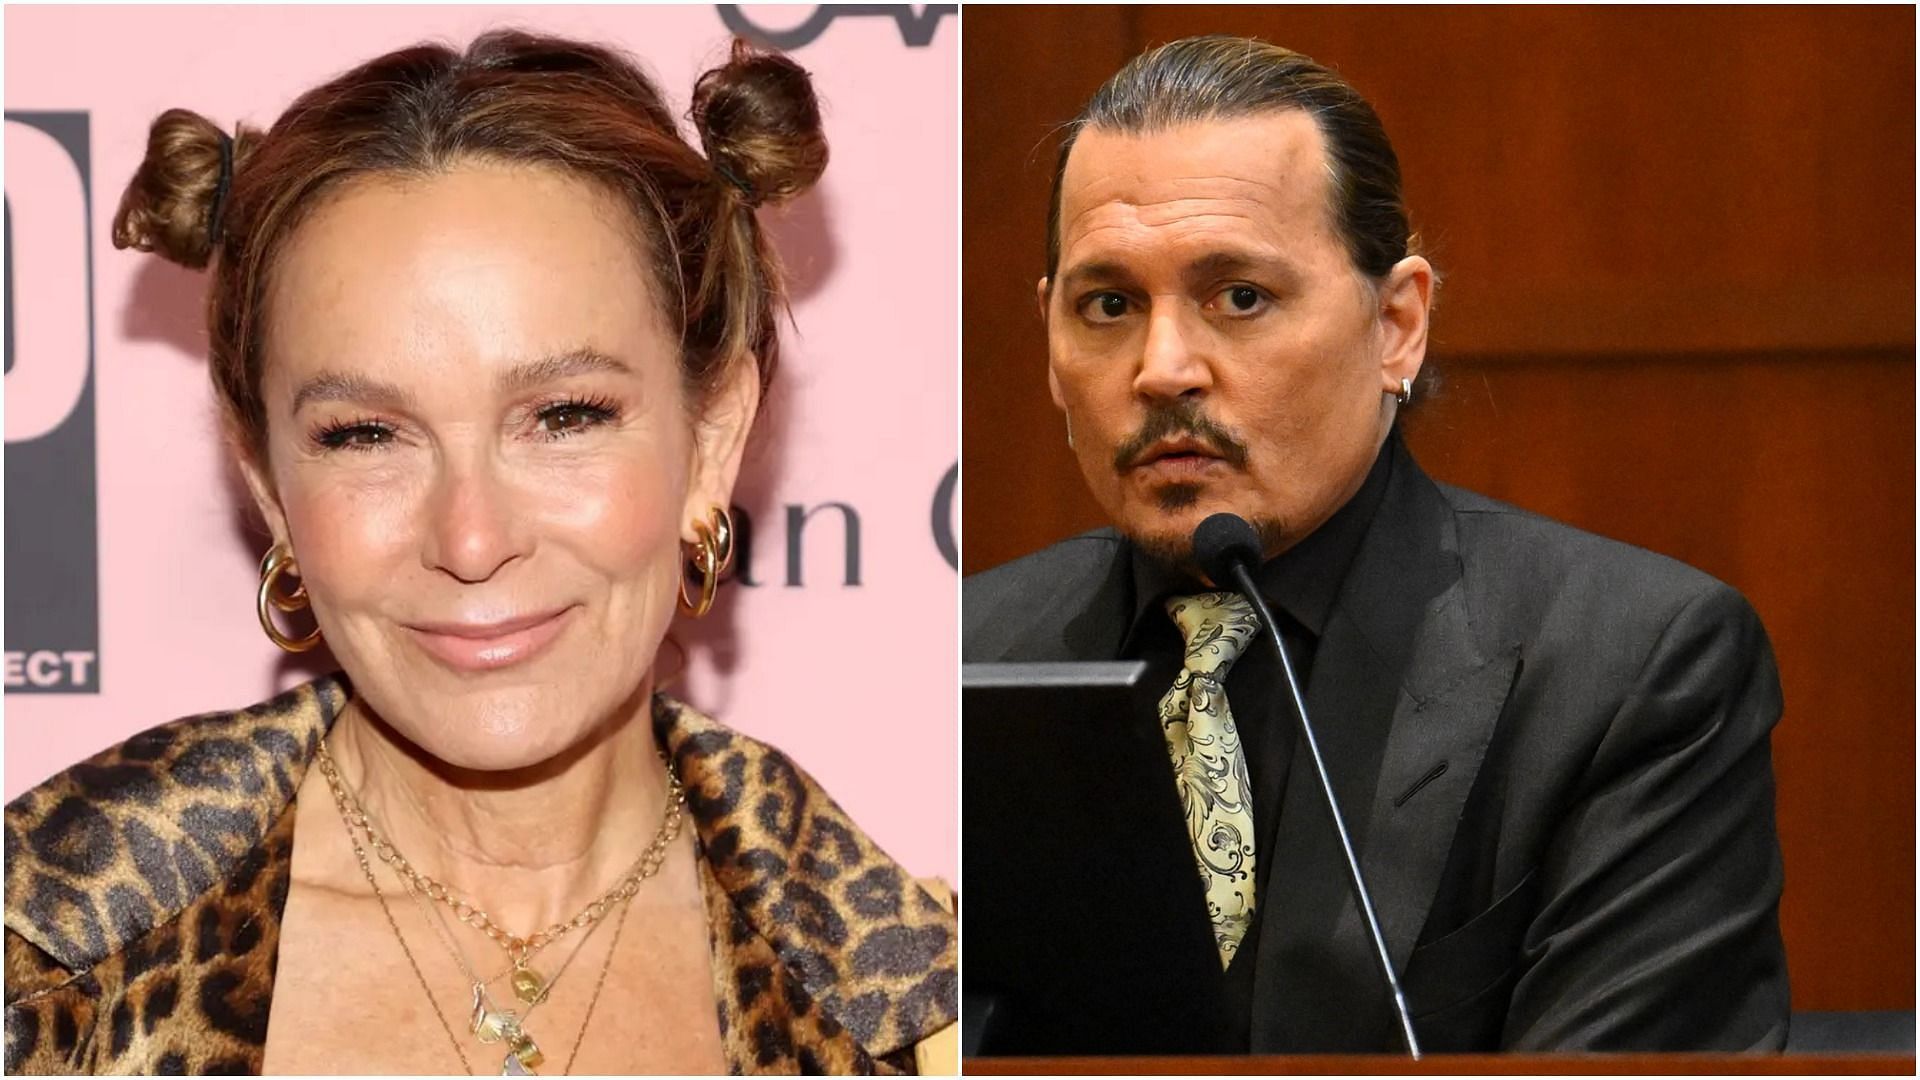 Jennifer Grey and Johnny Depp (Image via Amy Sussma/Getty Images and Jim Watson/AFP/Getty Images)